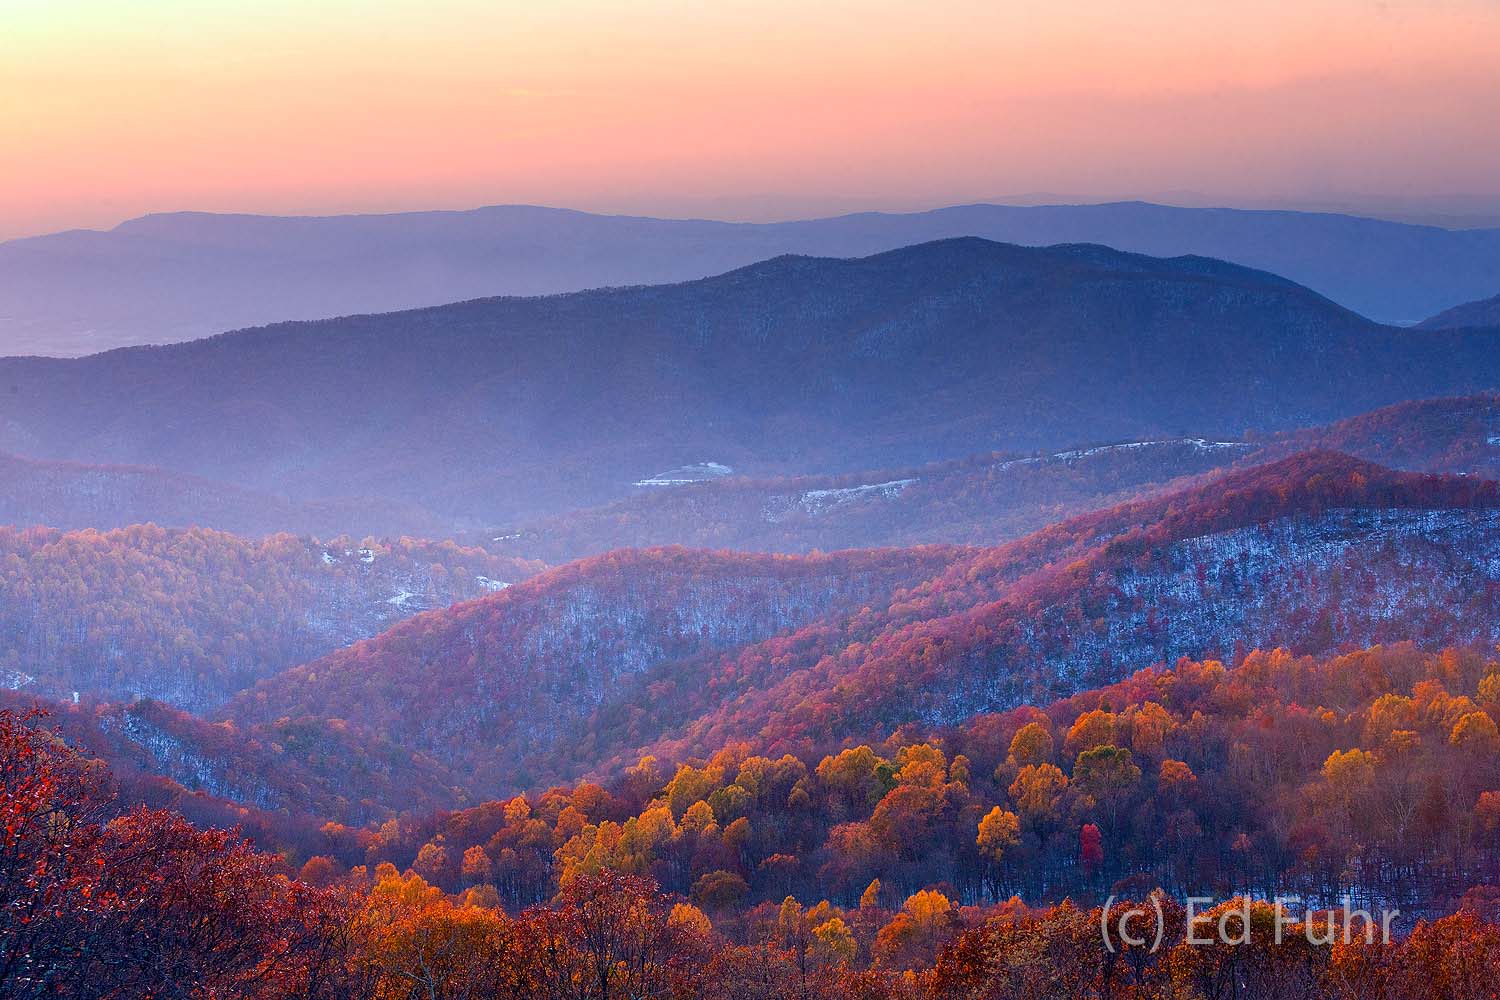 Autumn's colorful foliage clings to the trees in the valleys and slopes west of the Point Overlook below Shenandoah's peaks...